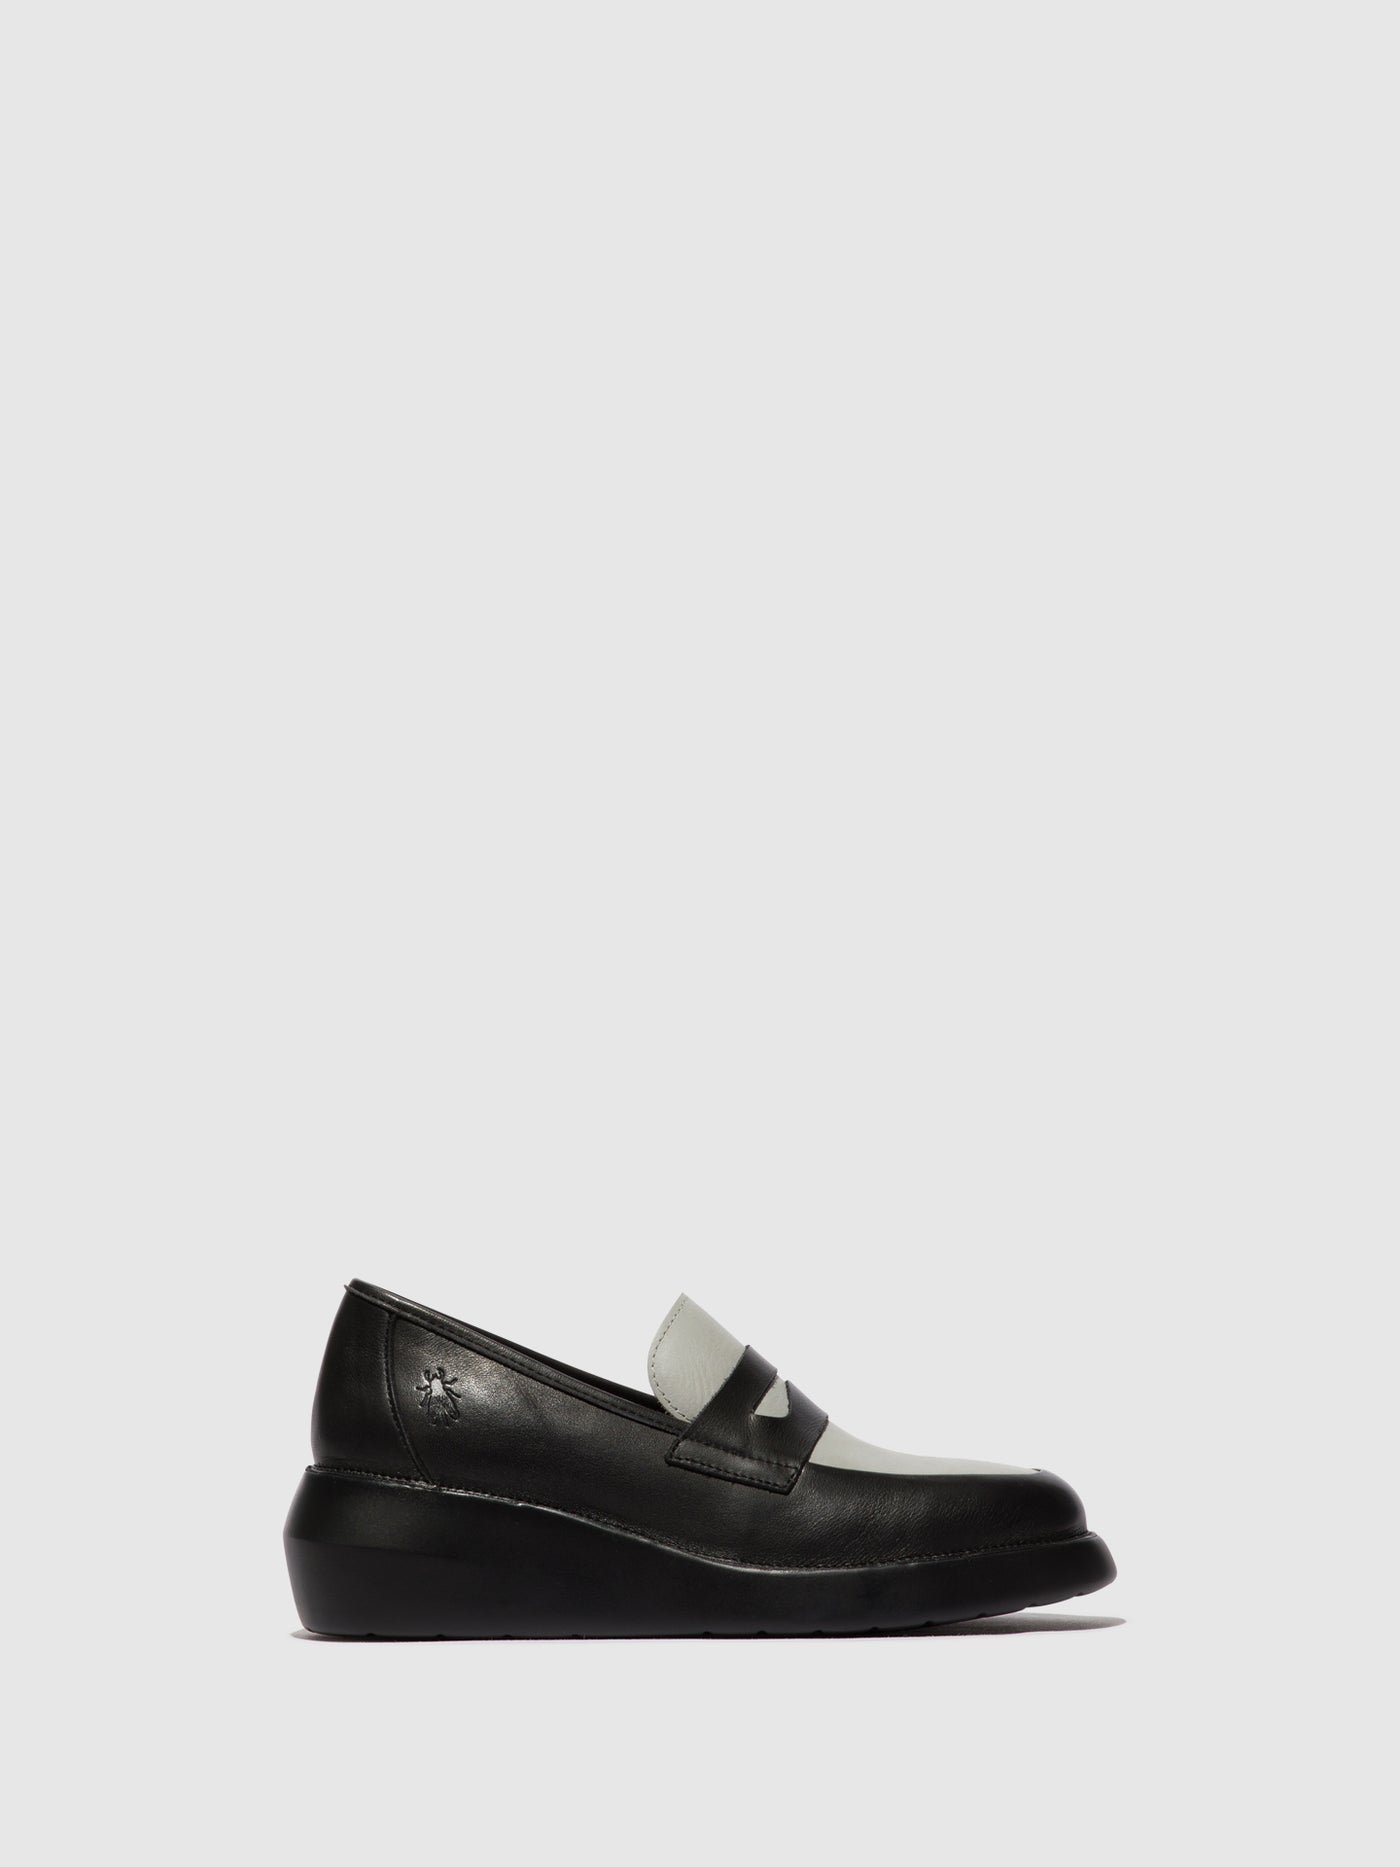 Loafers Shoes BLAR513FLY BLACK/GREY